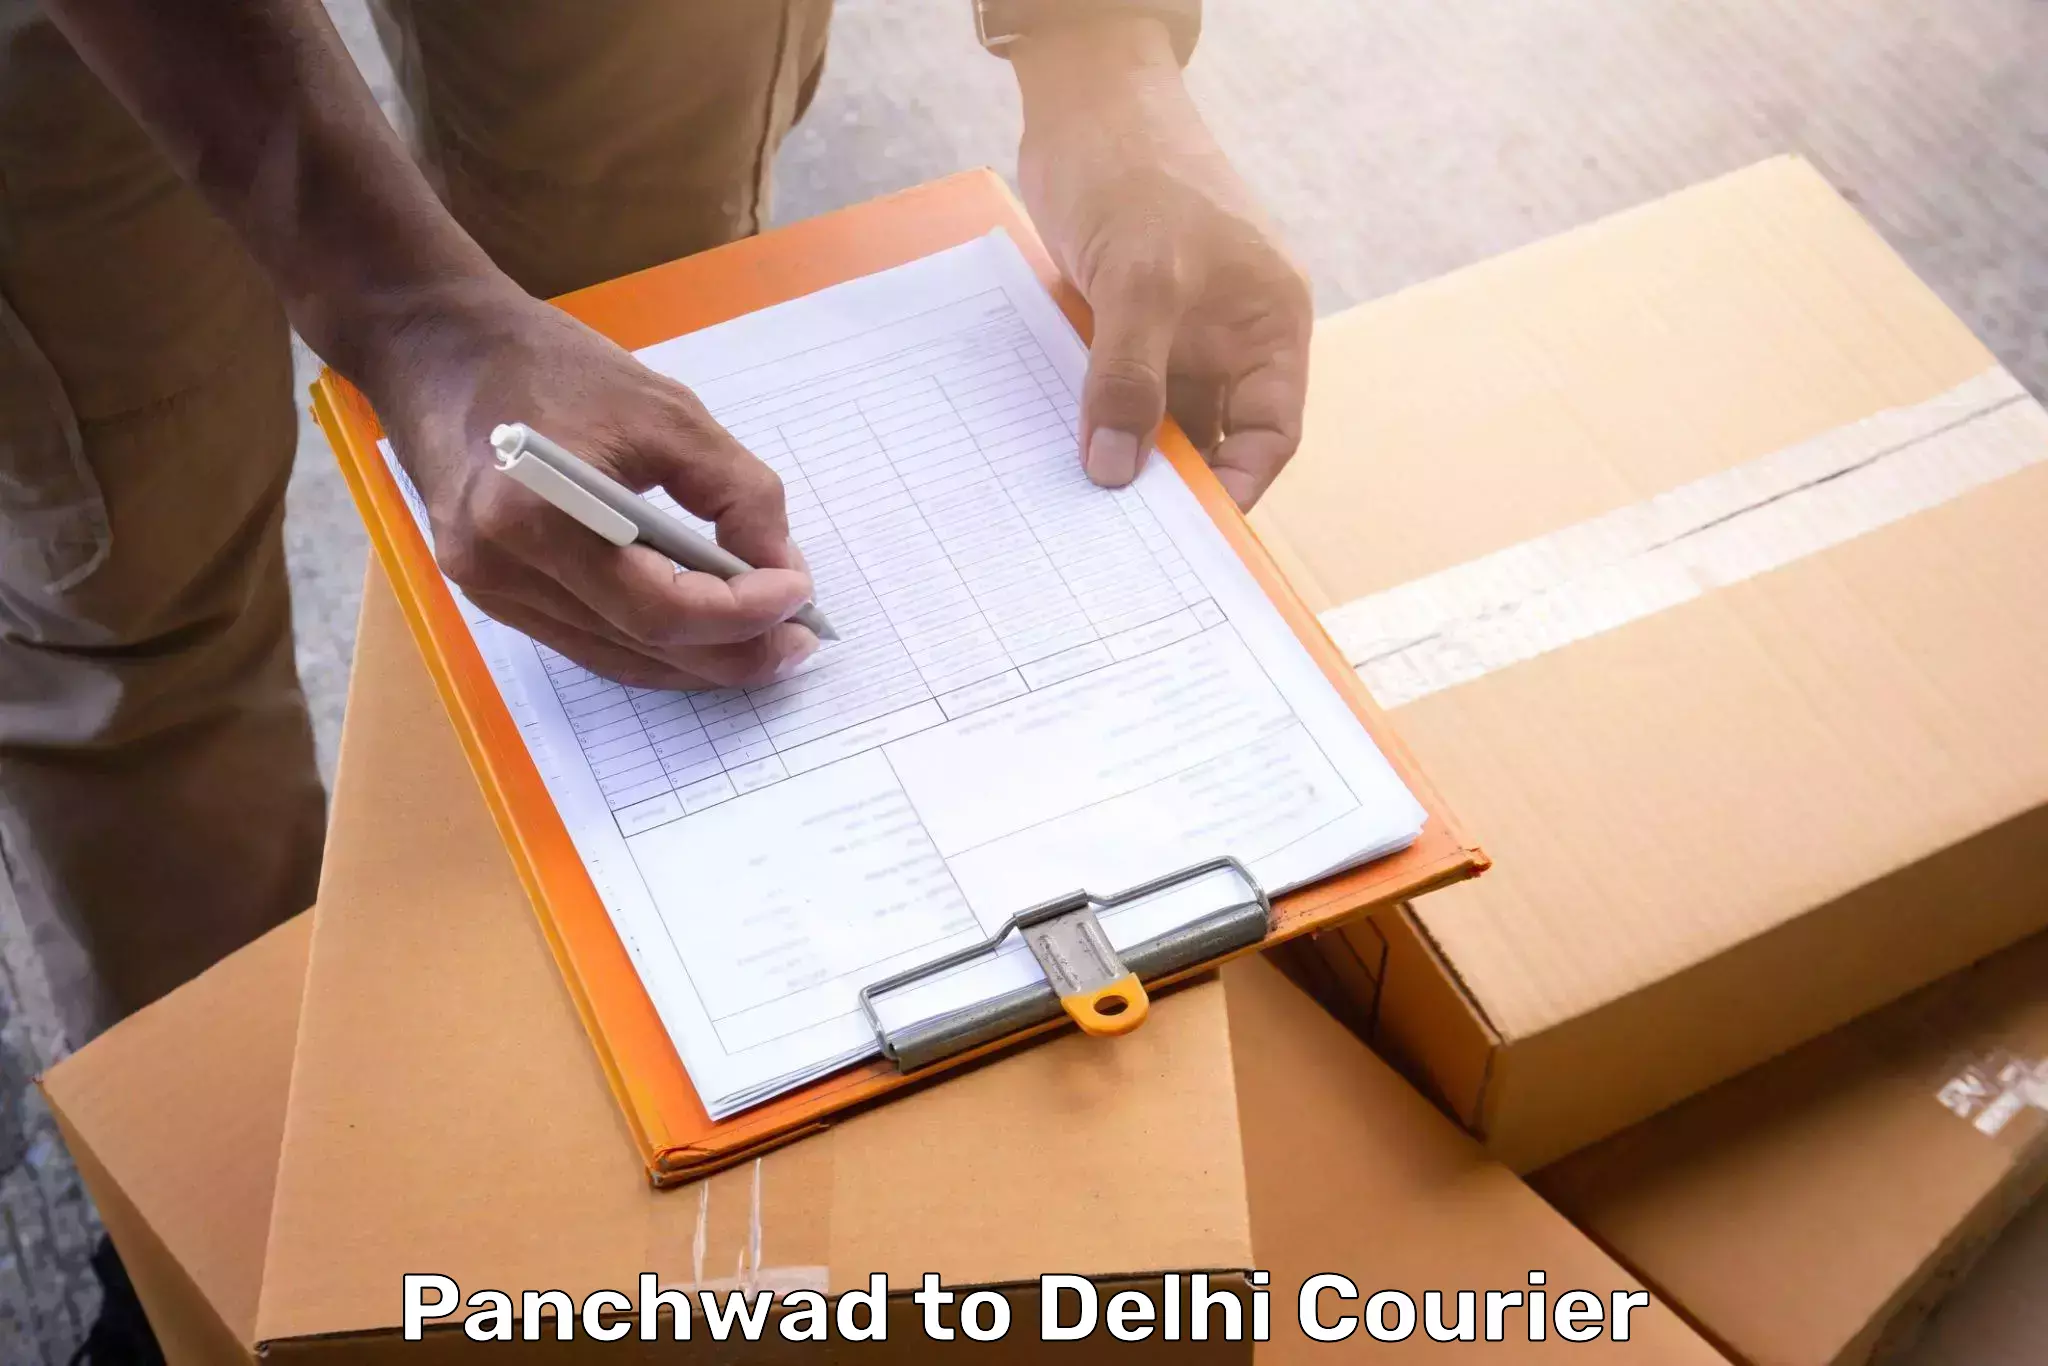 Emergency baggage service Panchwad to NCR